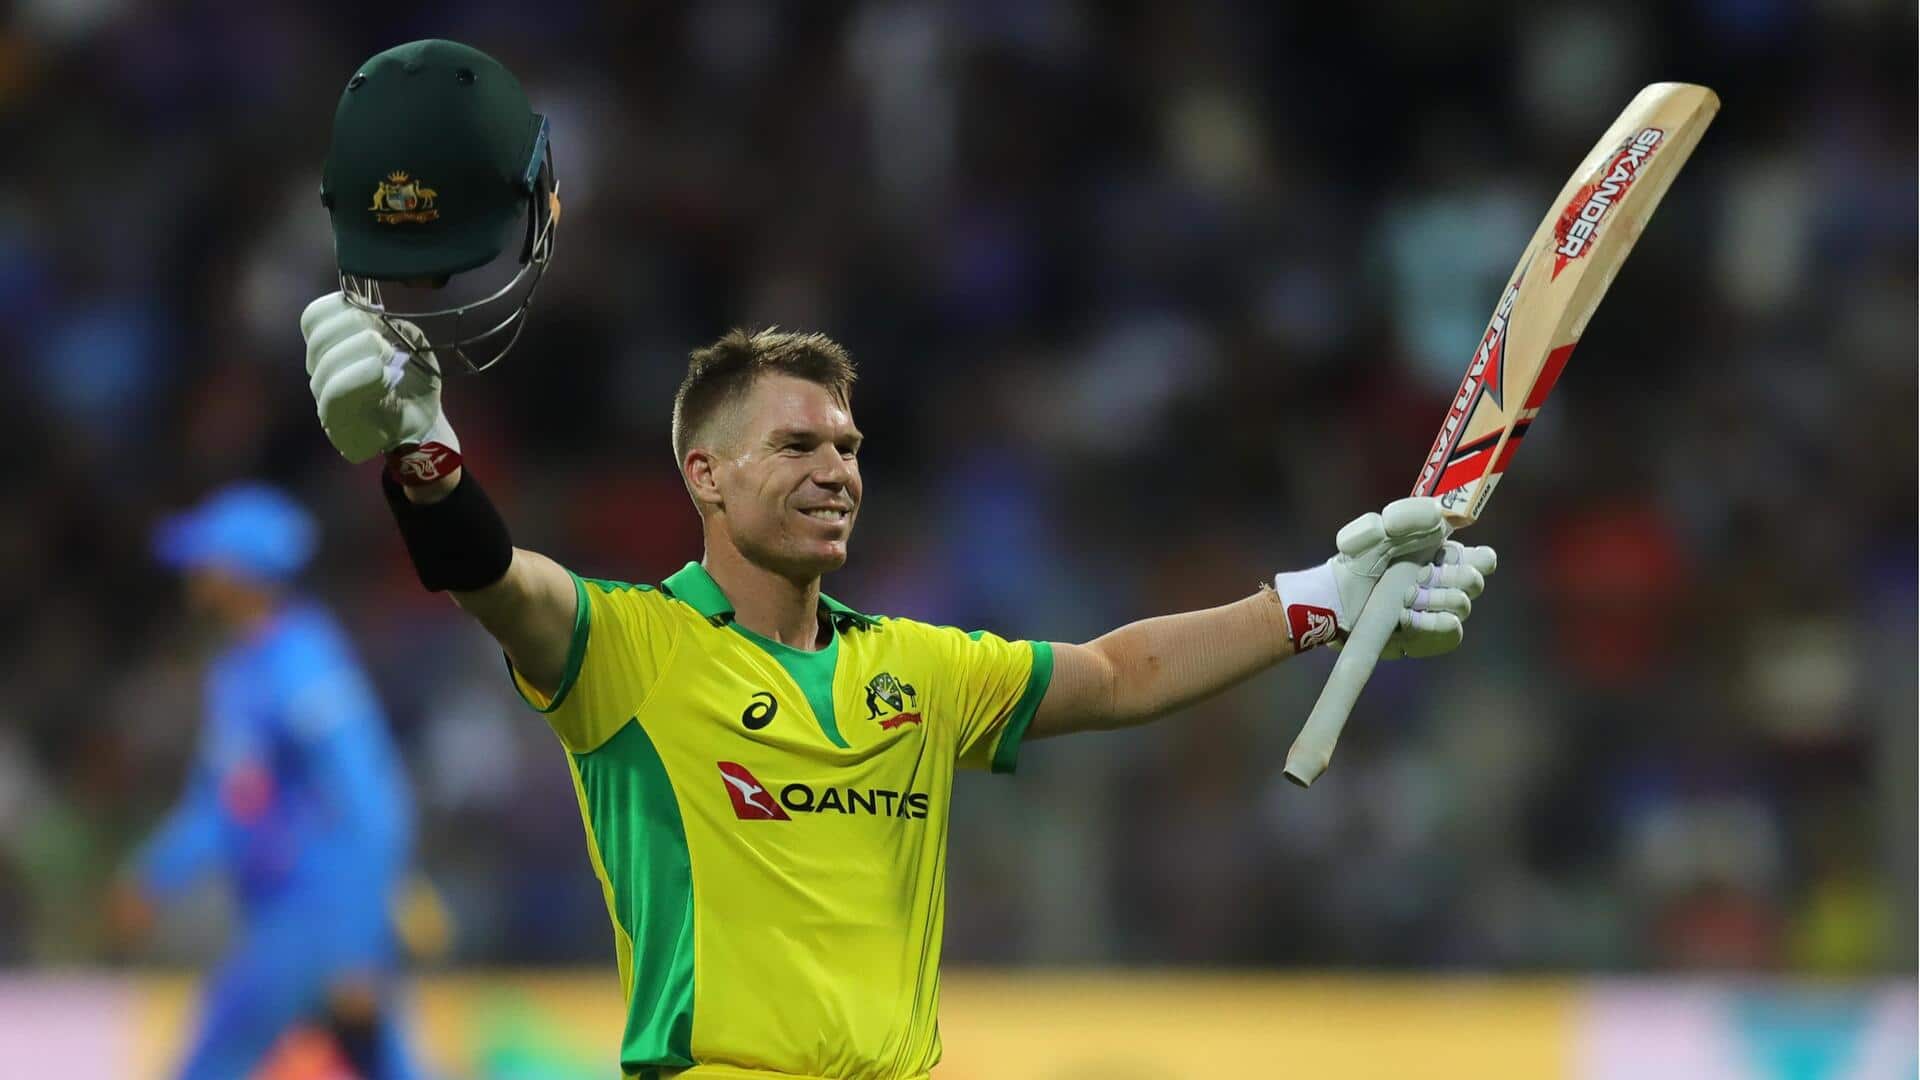 David Warner completes 100 sixes in ODIs: Key stats